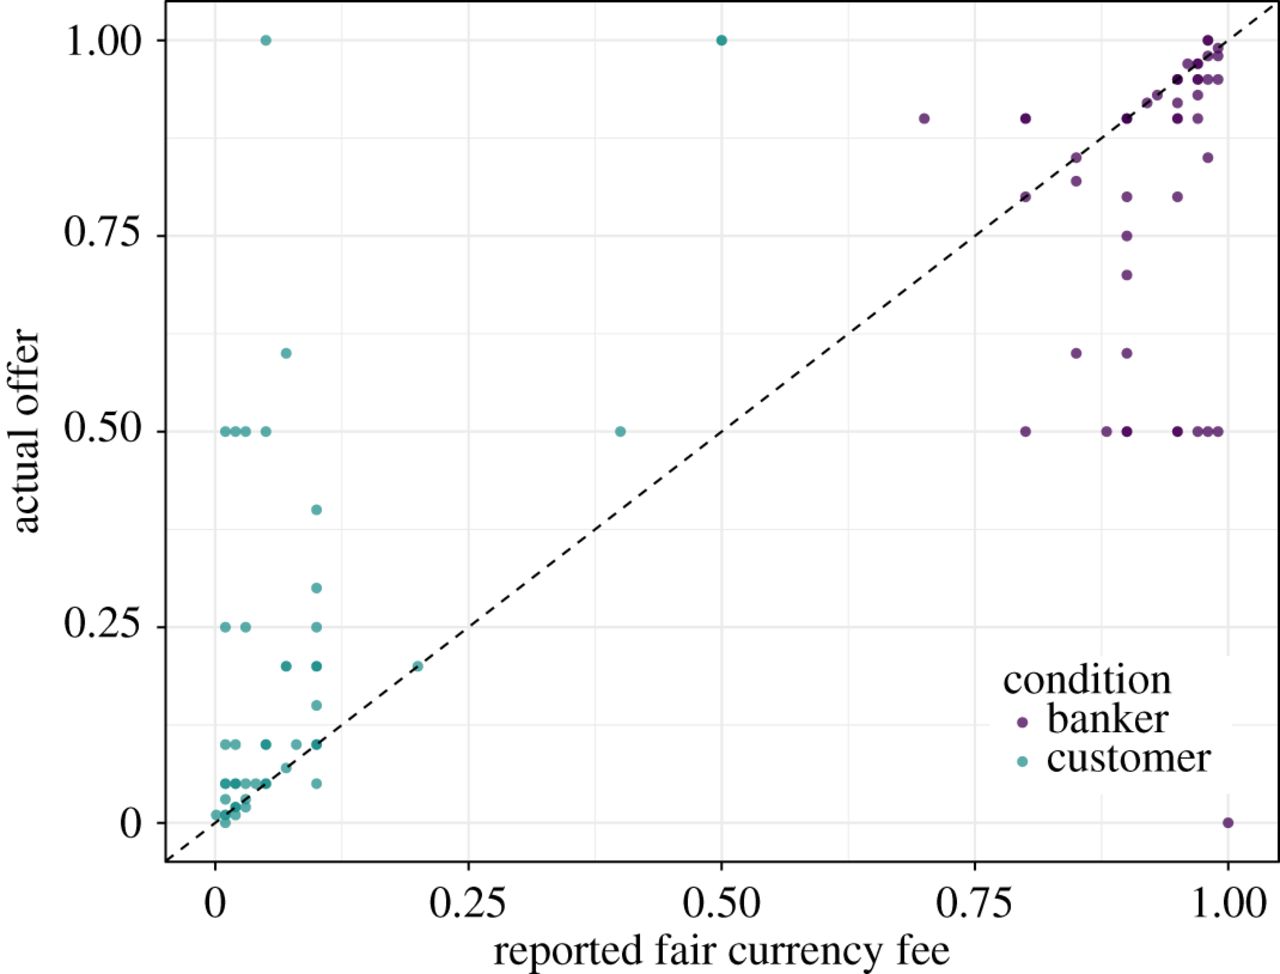 Self-reported fair offers vs. actual offers in a framed ultimatum game experiment. There were two framed conditions: banker and customer. From Lightner et al. 2017: http://dx.doi.org/10.1098/rsos.170543